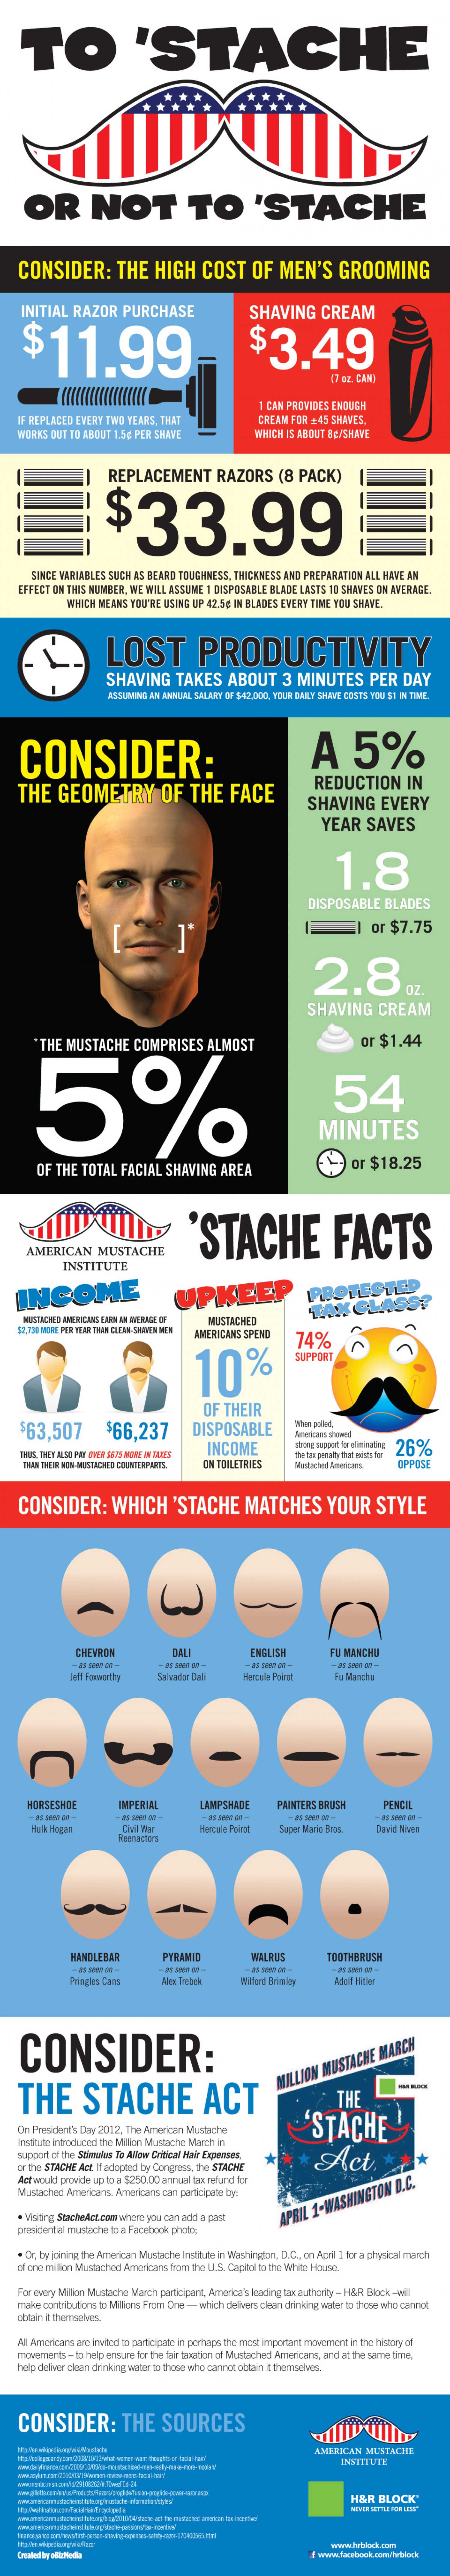 To 'Stache or Not to 'Stache: The Plight of the Mustached American